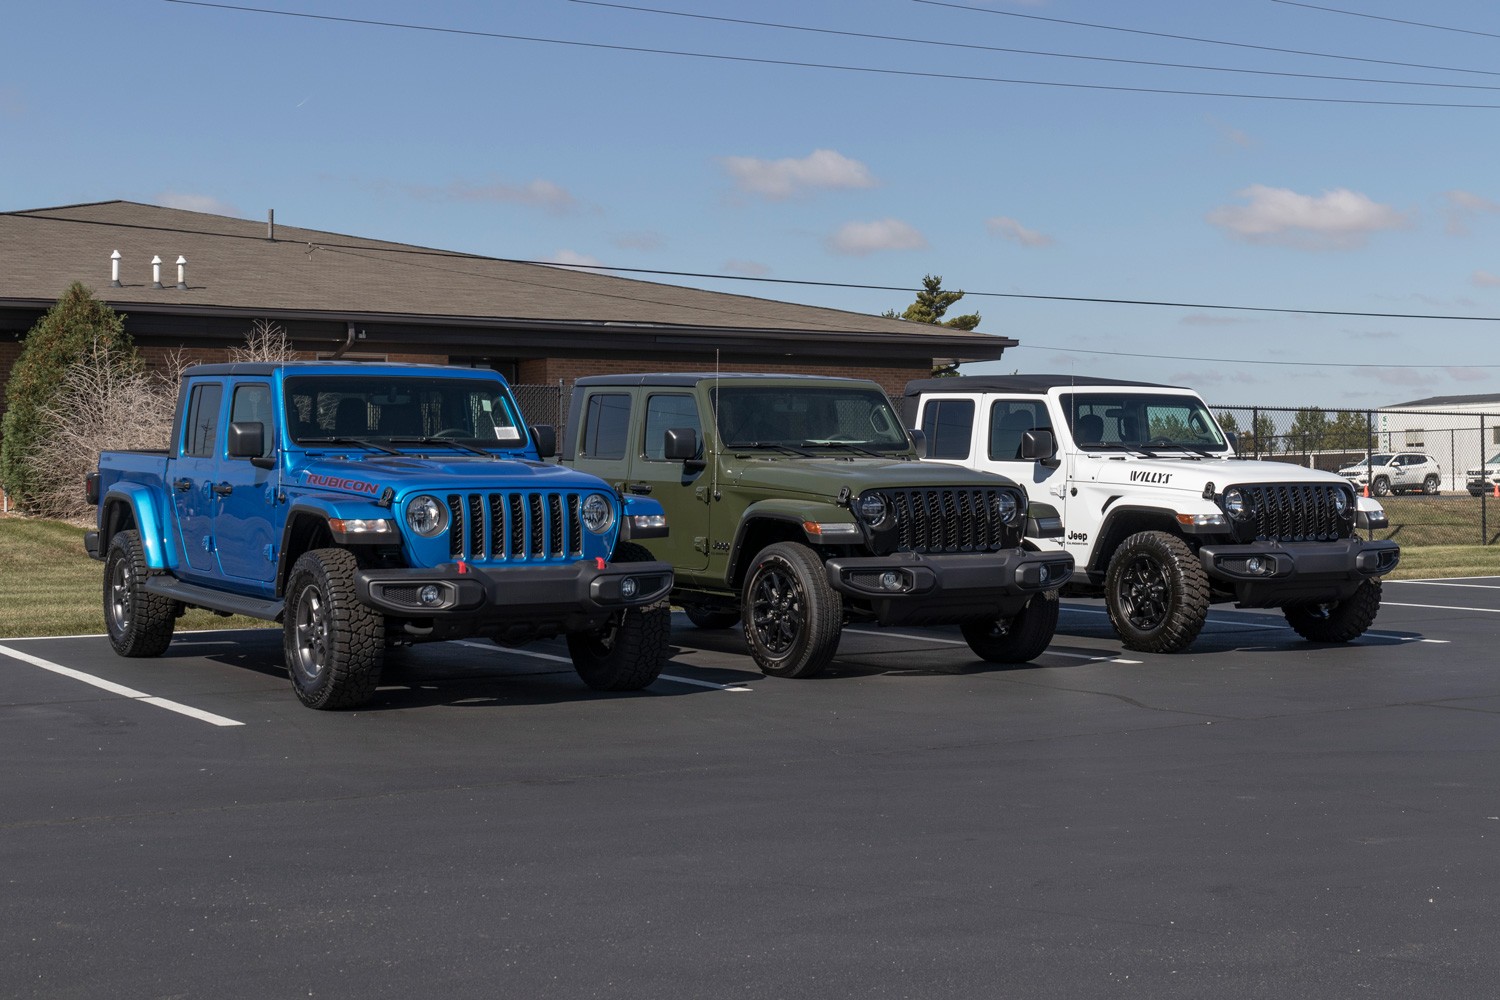 Jeep Gladiator display at a Stellantis dealer. The Jeep Gladiator models include the Sport, Willys, Rubicon and Mojave.